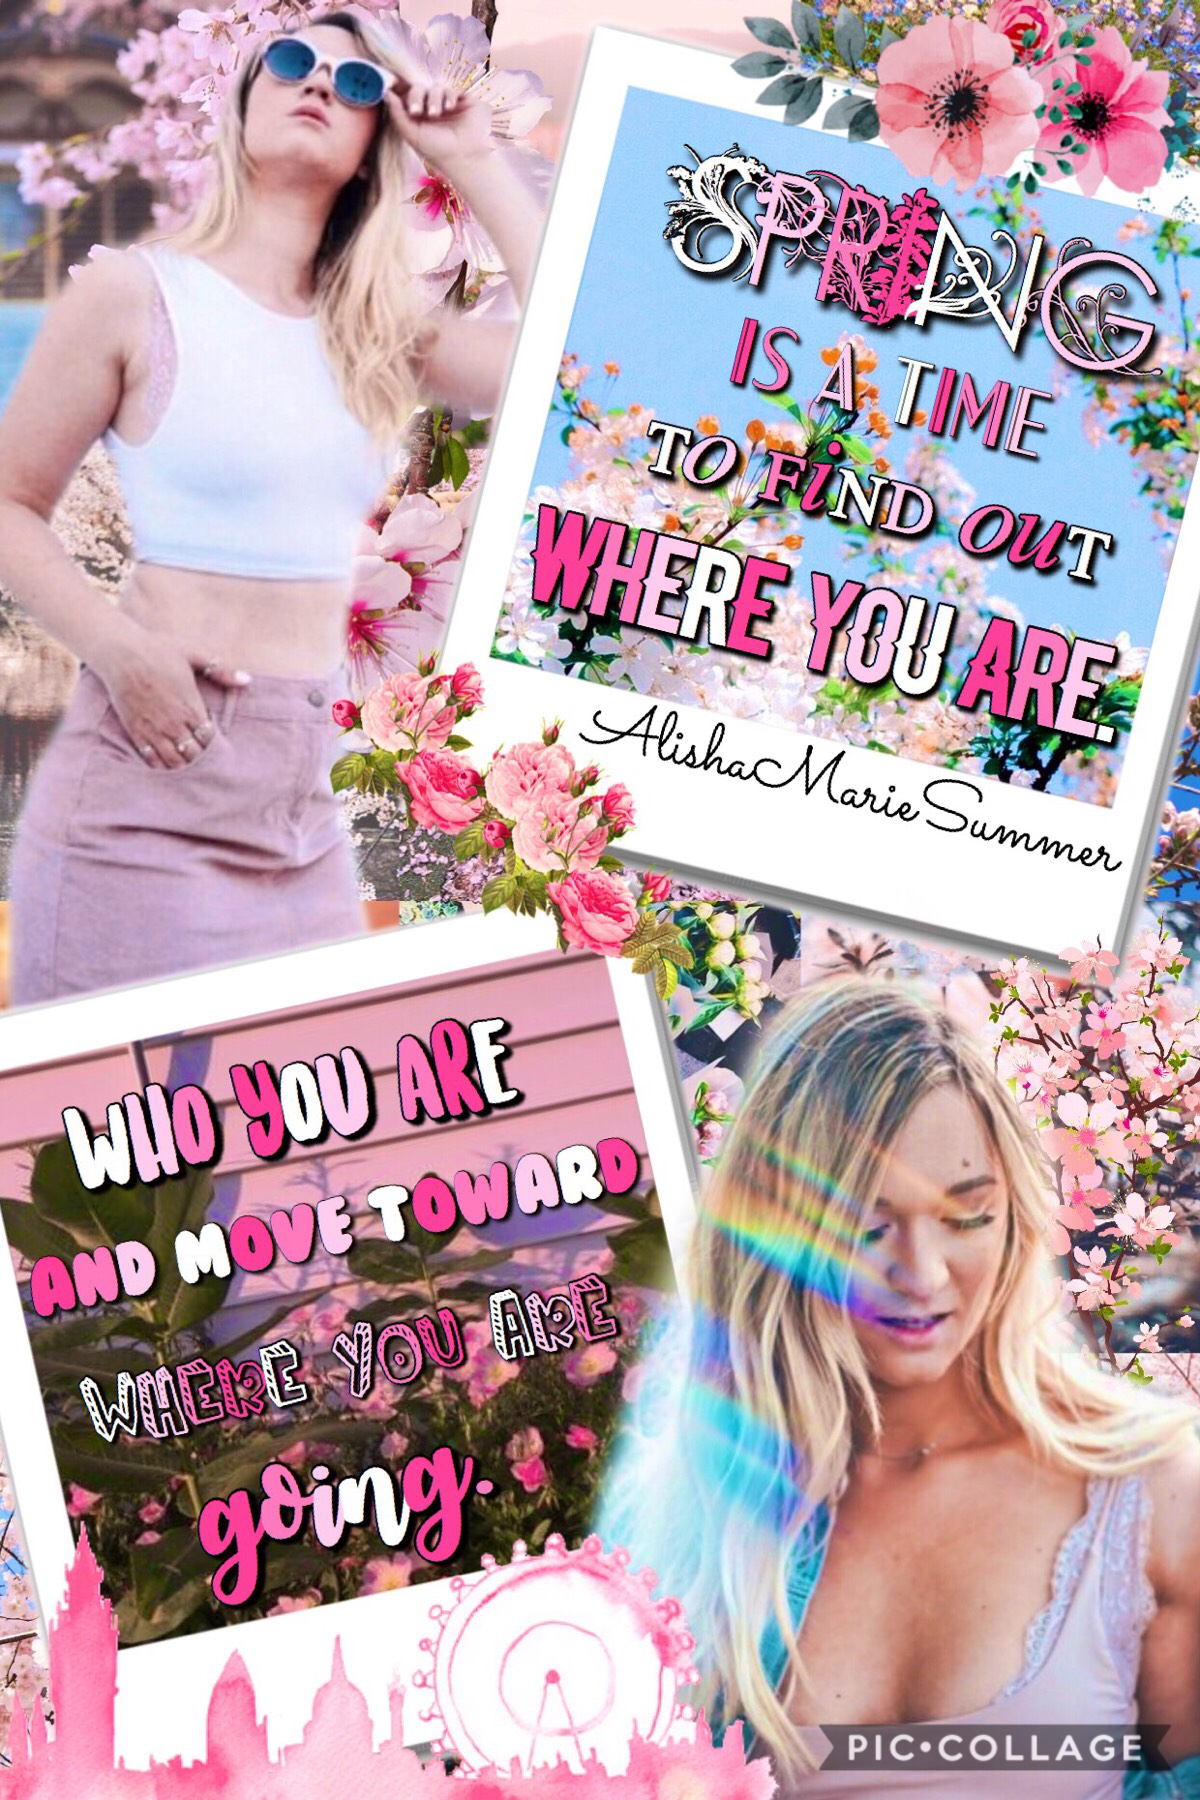 🎀TaP🎀
TYSM FOR 500 FOLLOWERS!! I am so thankful for each and every one of them. this was an entry for a Battle of the Collgers (i won😁🥇) QOTD: is it spring time where you live? 